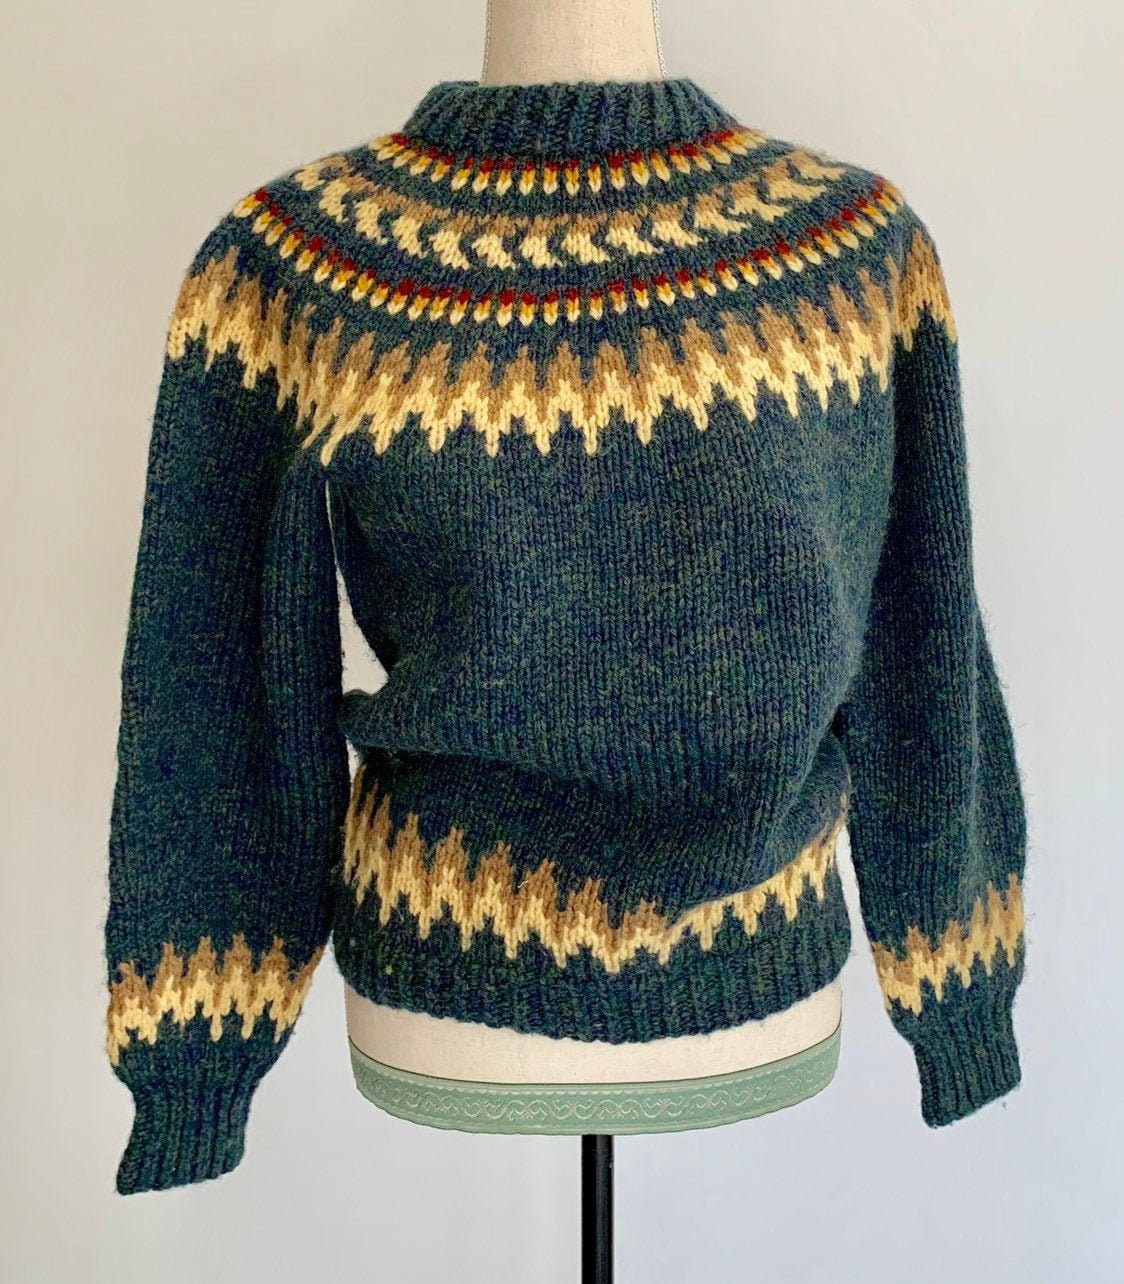 Fair Isle Knit Sweater Vintage 70s Pure Wool Hand Knitted in the